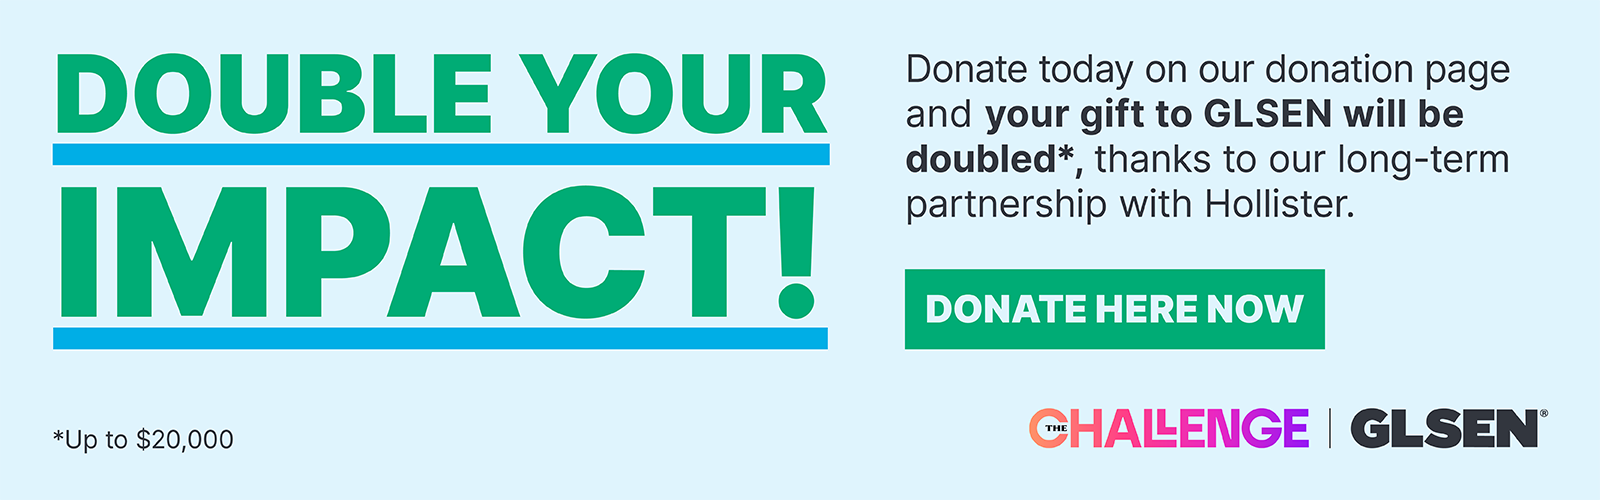 Donate to GLSEN today and your gift will be doubled!